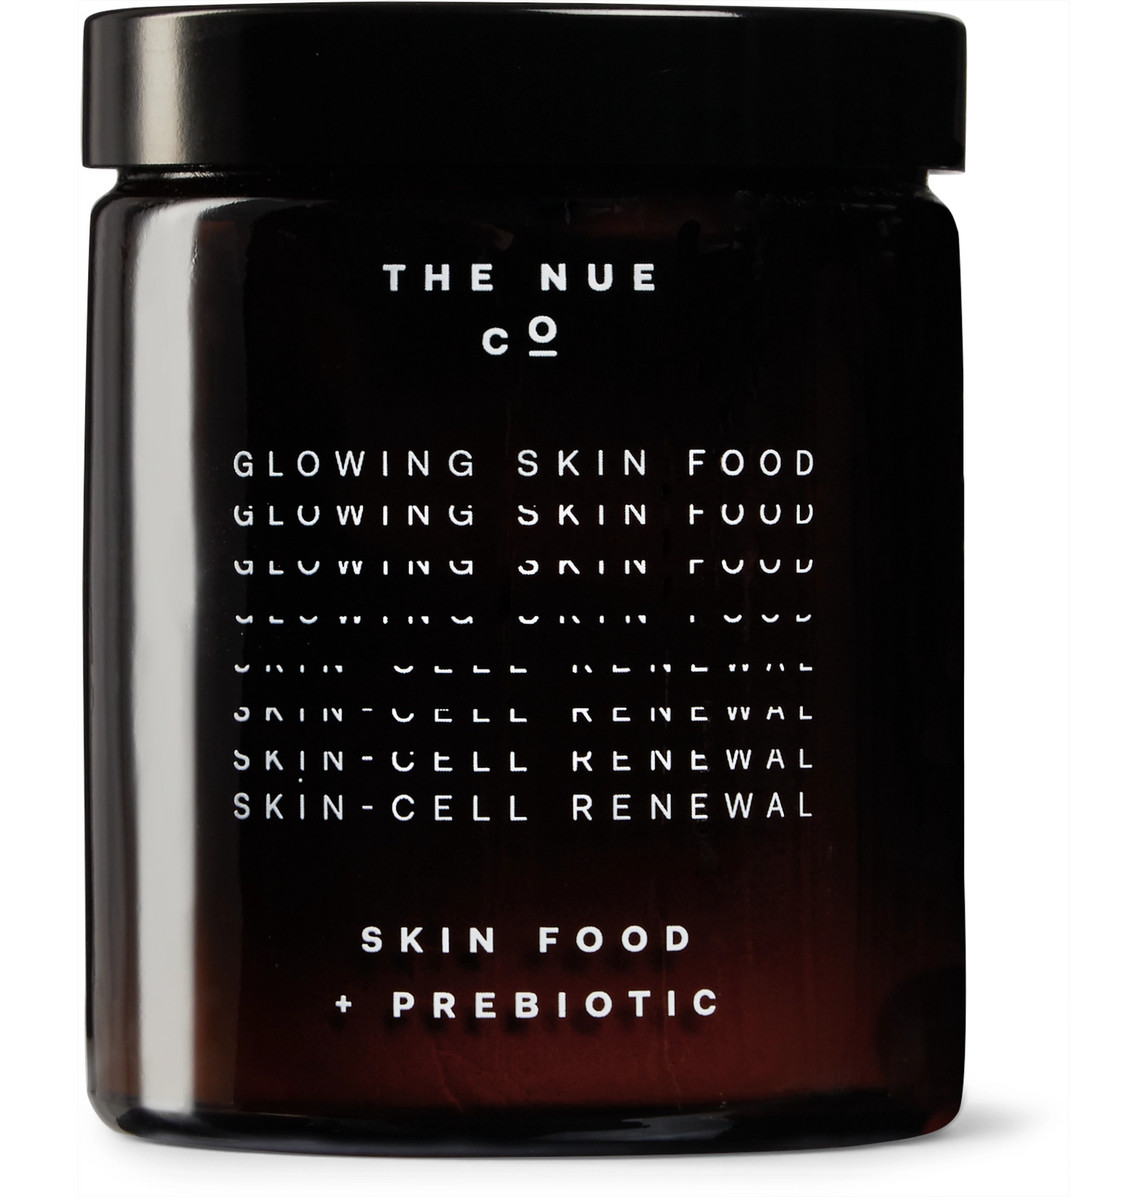 The Nue Co Skin Food Prebiotic, 100g In Colorless